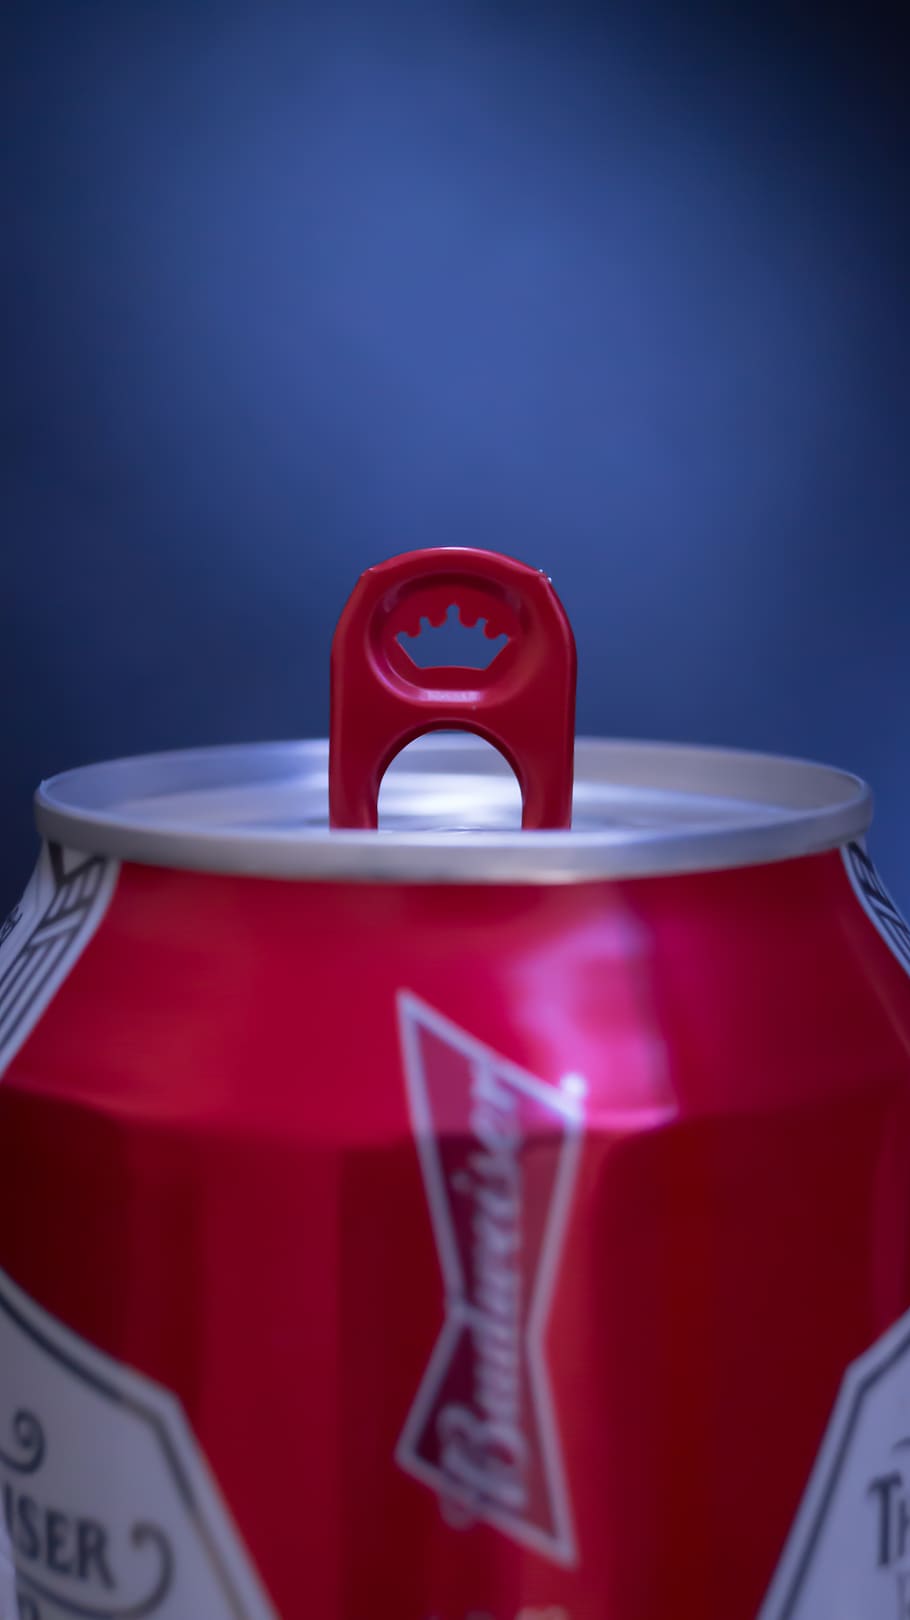 Budweiser beer can, red, food and drink, colored background, no people